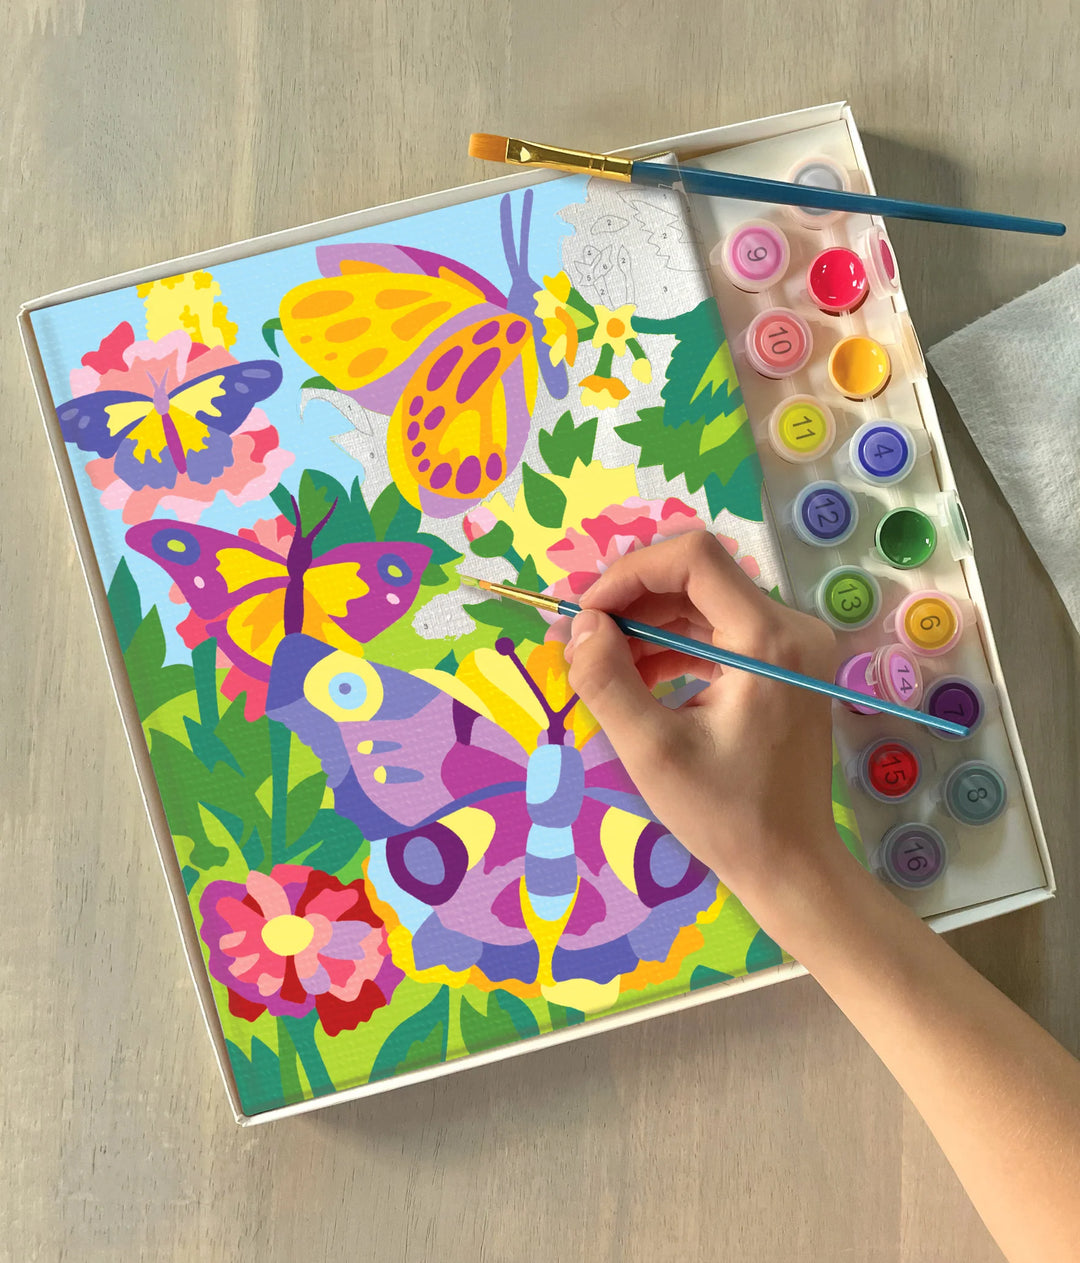 Butterflies & Blooms Paint by Numbers